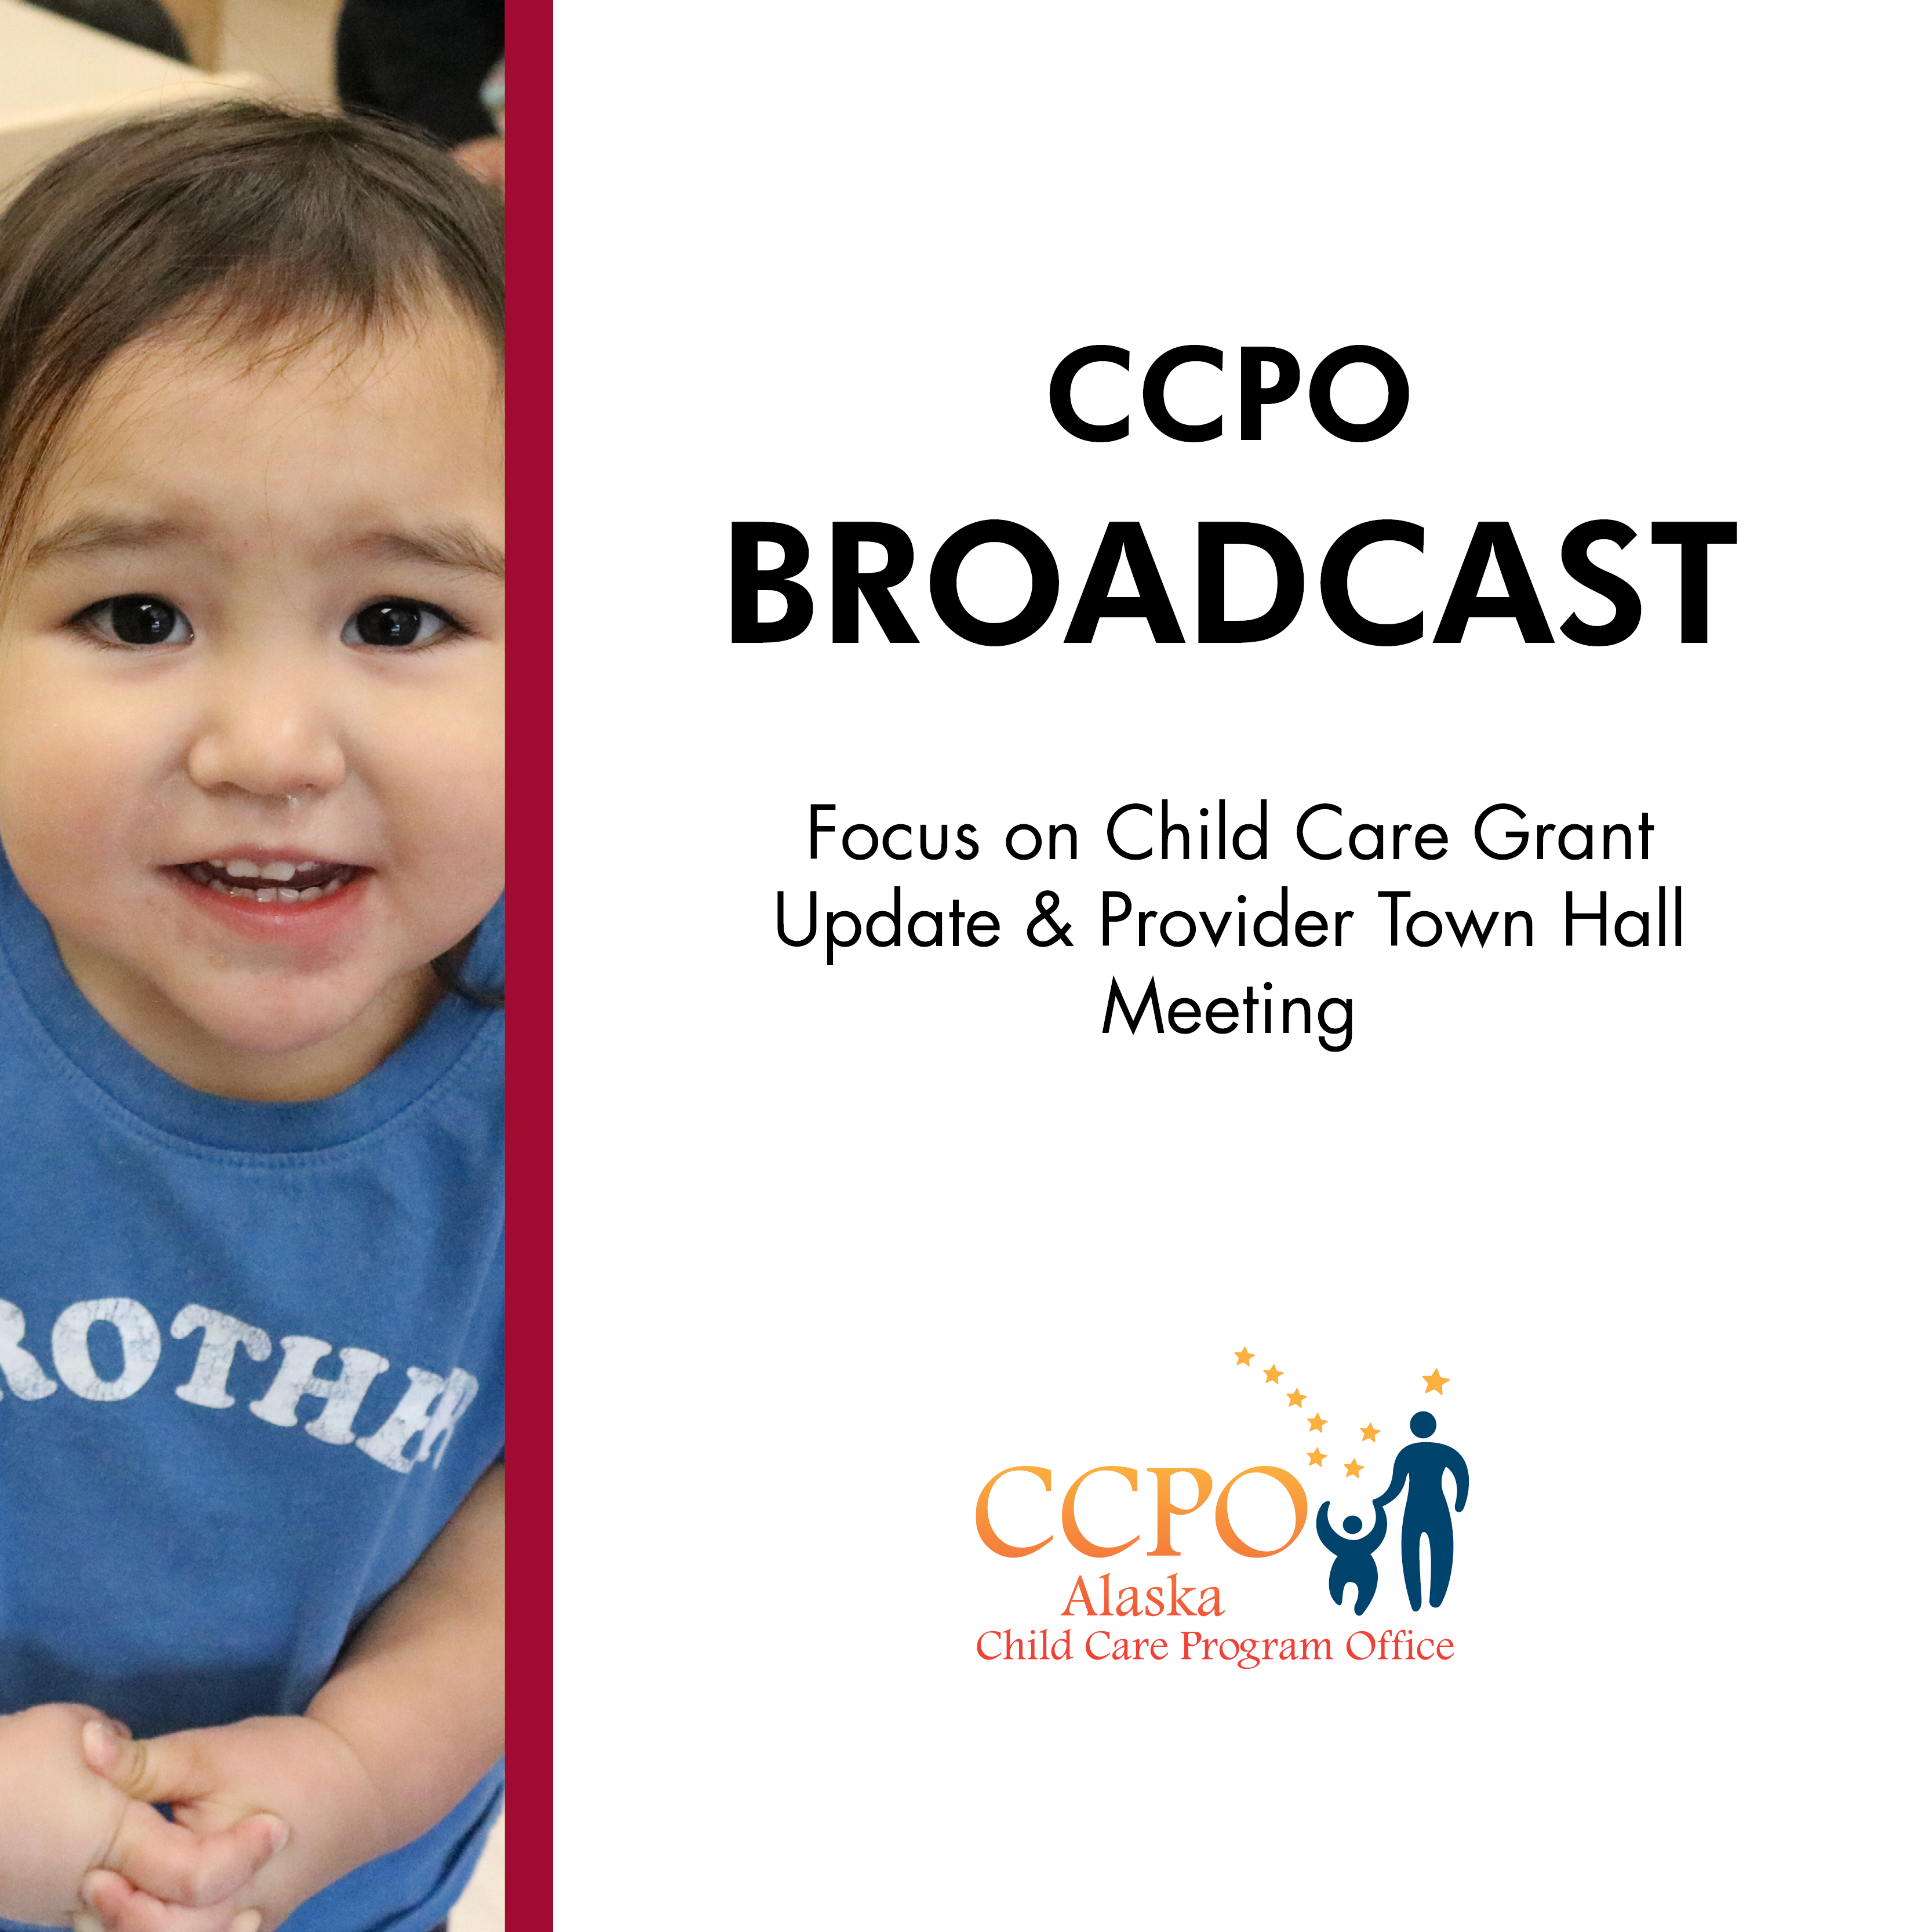 Child Care Program Office Broadcast: Focus on Child Care Grant Update & Provider Town Hall Meeting